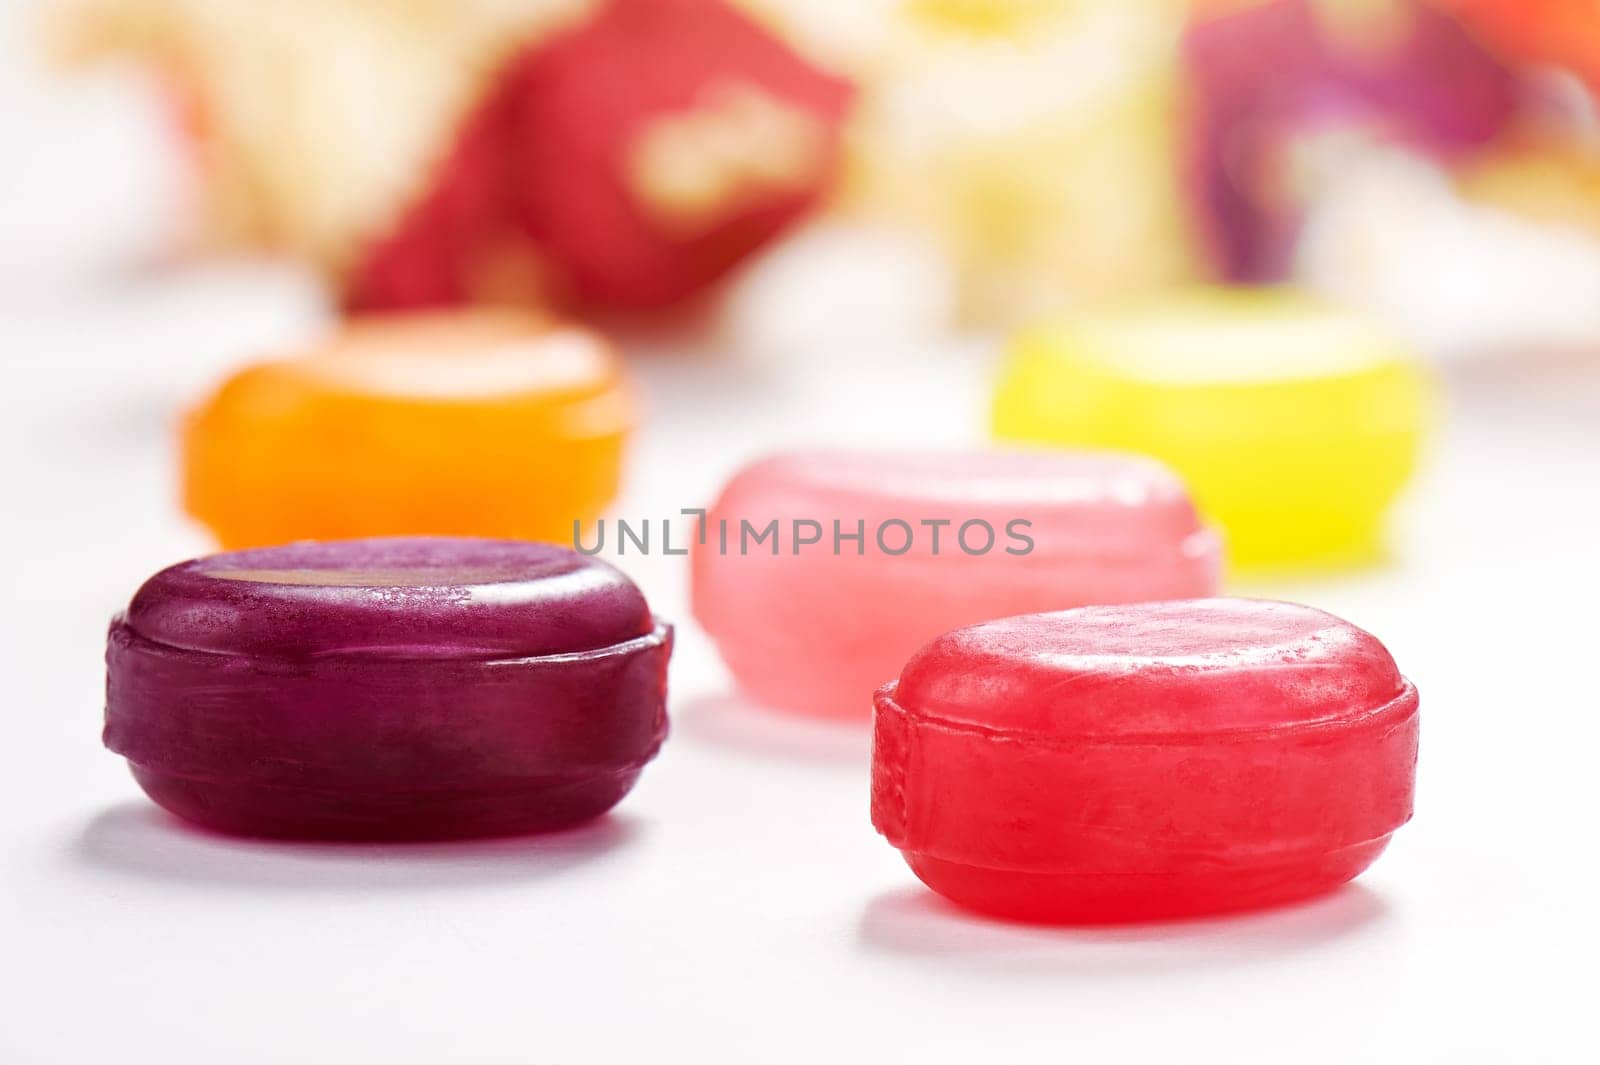 Several colorful lollipop candies closeup on white surface by maxcab